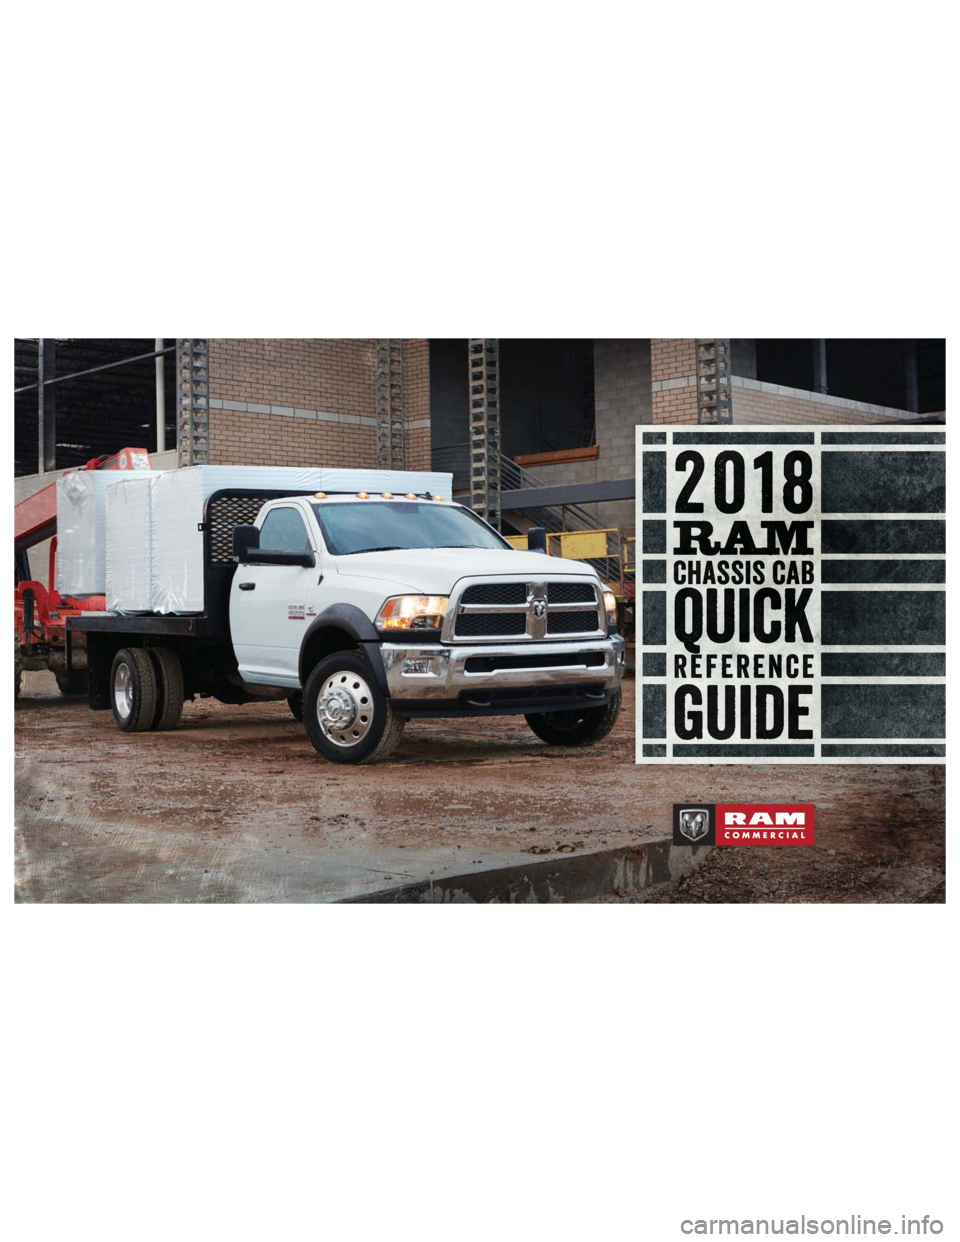 Ram 4500 Chassis Cab 2018  Quick Reference Guide CCCCCCCCCCCCCCCCCCCCCCCCCCCCCCCCCCCCCCCCCCCCCHHHHHHHHHHHHHHHHHHHHHHHHHHHHHHHHHHHHHHHHHHHHHHHHHHHHHHAAAAAAAAAAAAAAAAAAAAAAAAAAAAAAAAAAAAAAAAAAAAAAAAAAAAAAAAAAASSSSSSSSSSSSSSSSSSSSSSSSSSSSSSSSSSSSSSSSSS